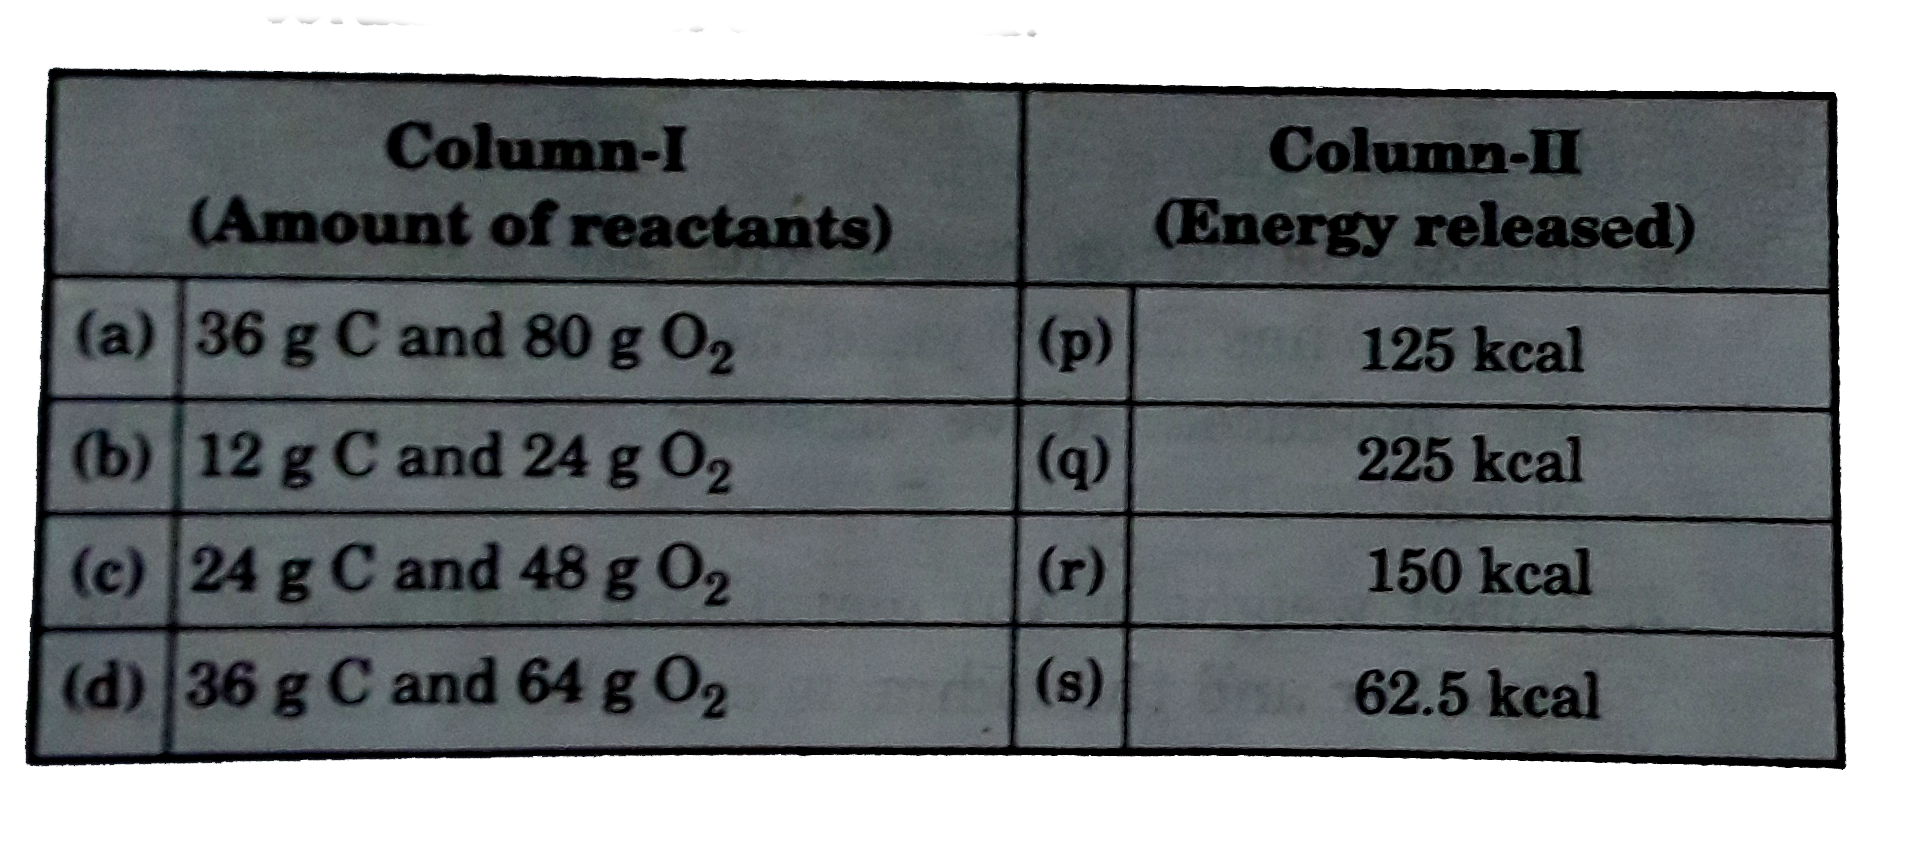 Two substance C and O(2) are allowed to react completely to form CO and CO(2) mixture , leaving none of the reactants . Its is known that when I mole of CO(2) ,100 Kcal of energy is released and when 1 mole of carbon reacts with 0.5 mole of O(2) to give of CO,25 Kcal is liberated . Using this information match column I and column II.